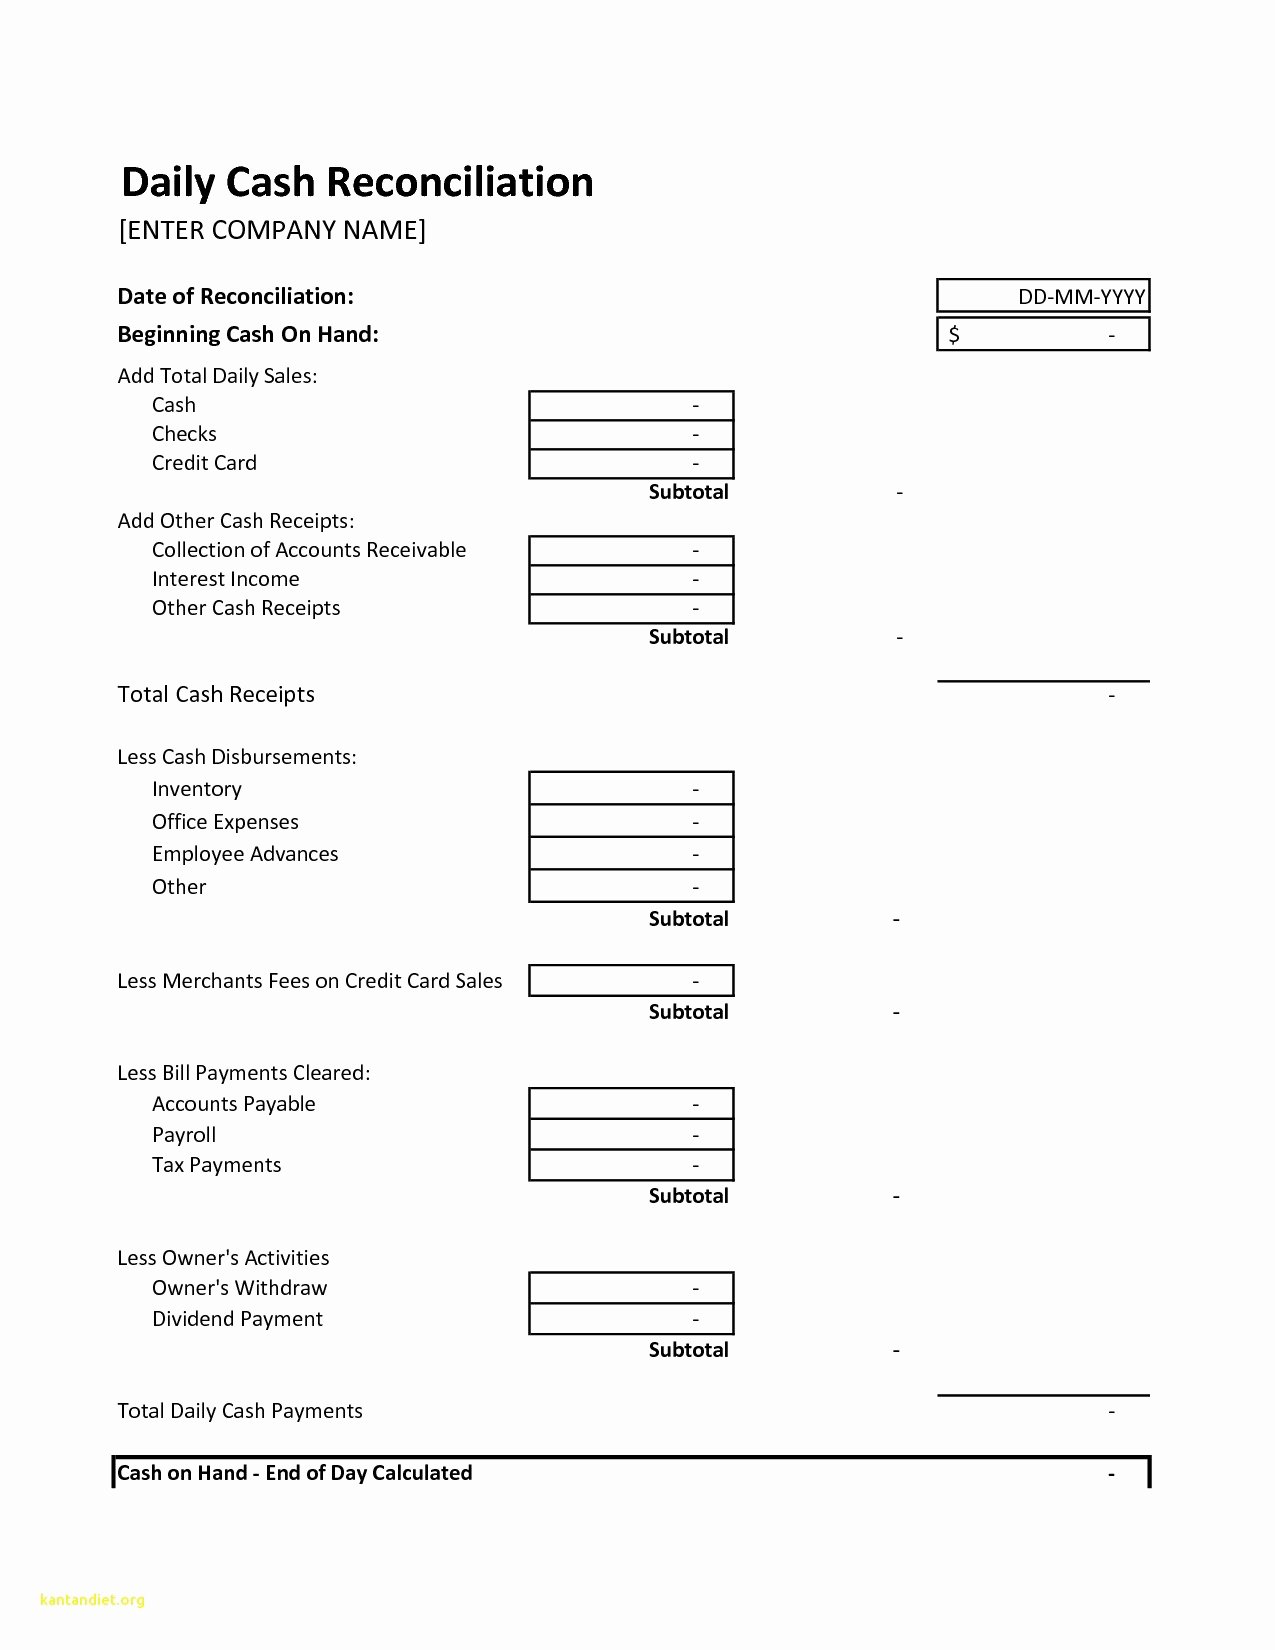 Daily Cash Report Template Fresh Daily Cash Sheet Template Excel